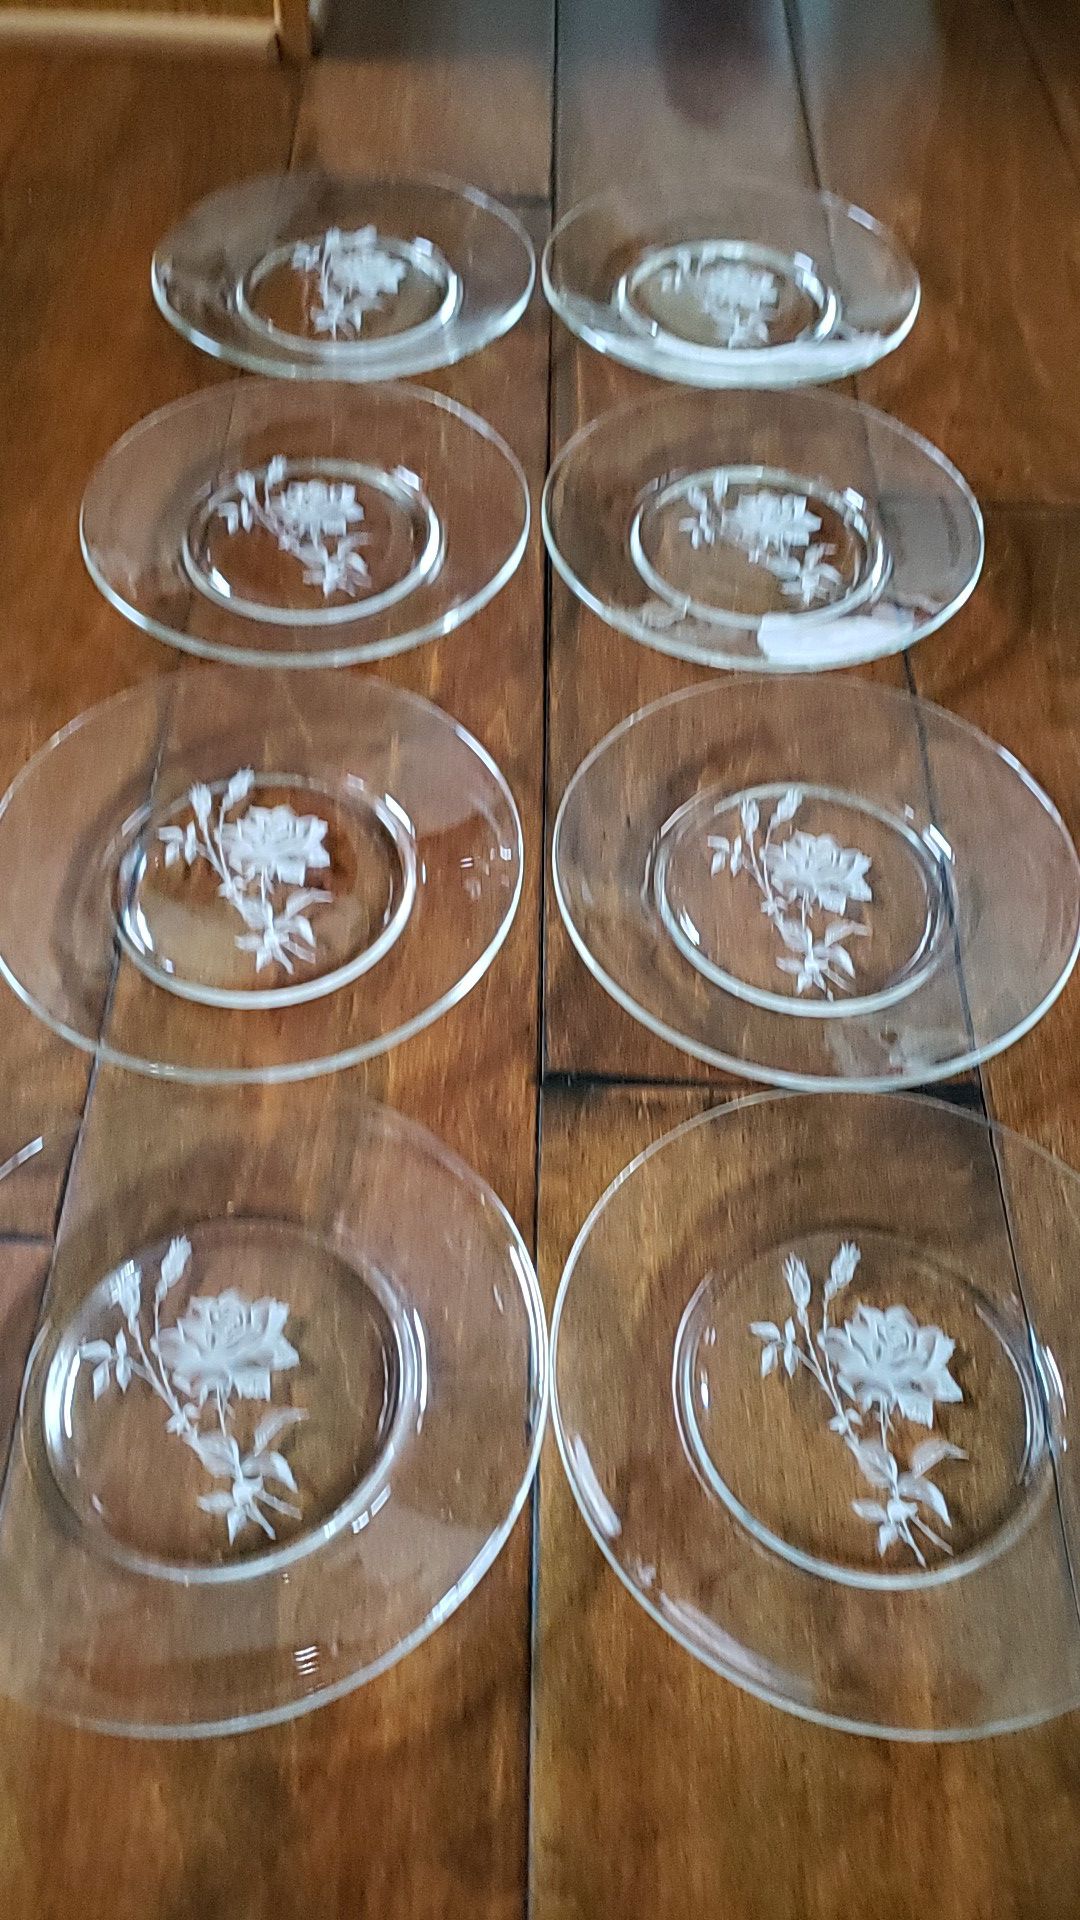 Set of 8 Antique Glass Plates - Moving must sell